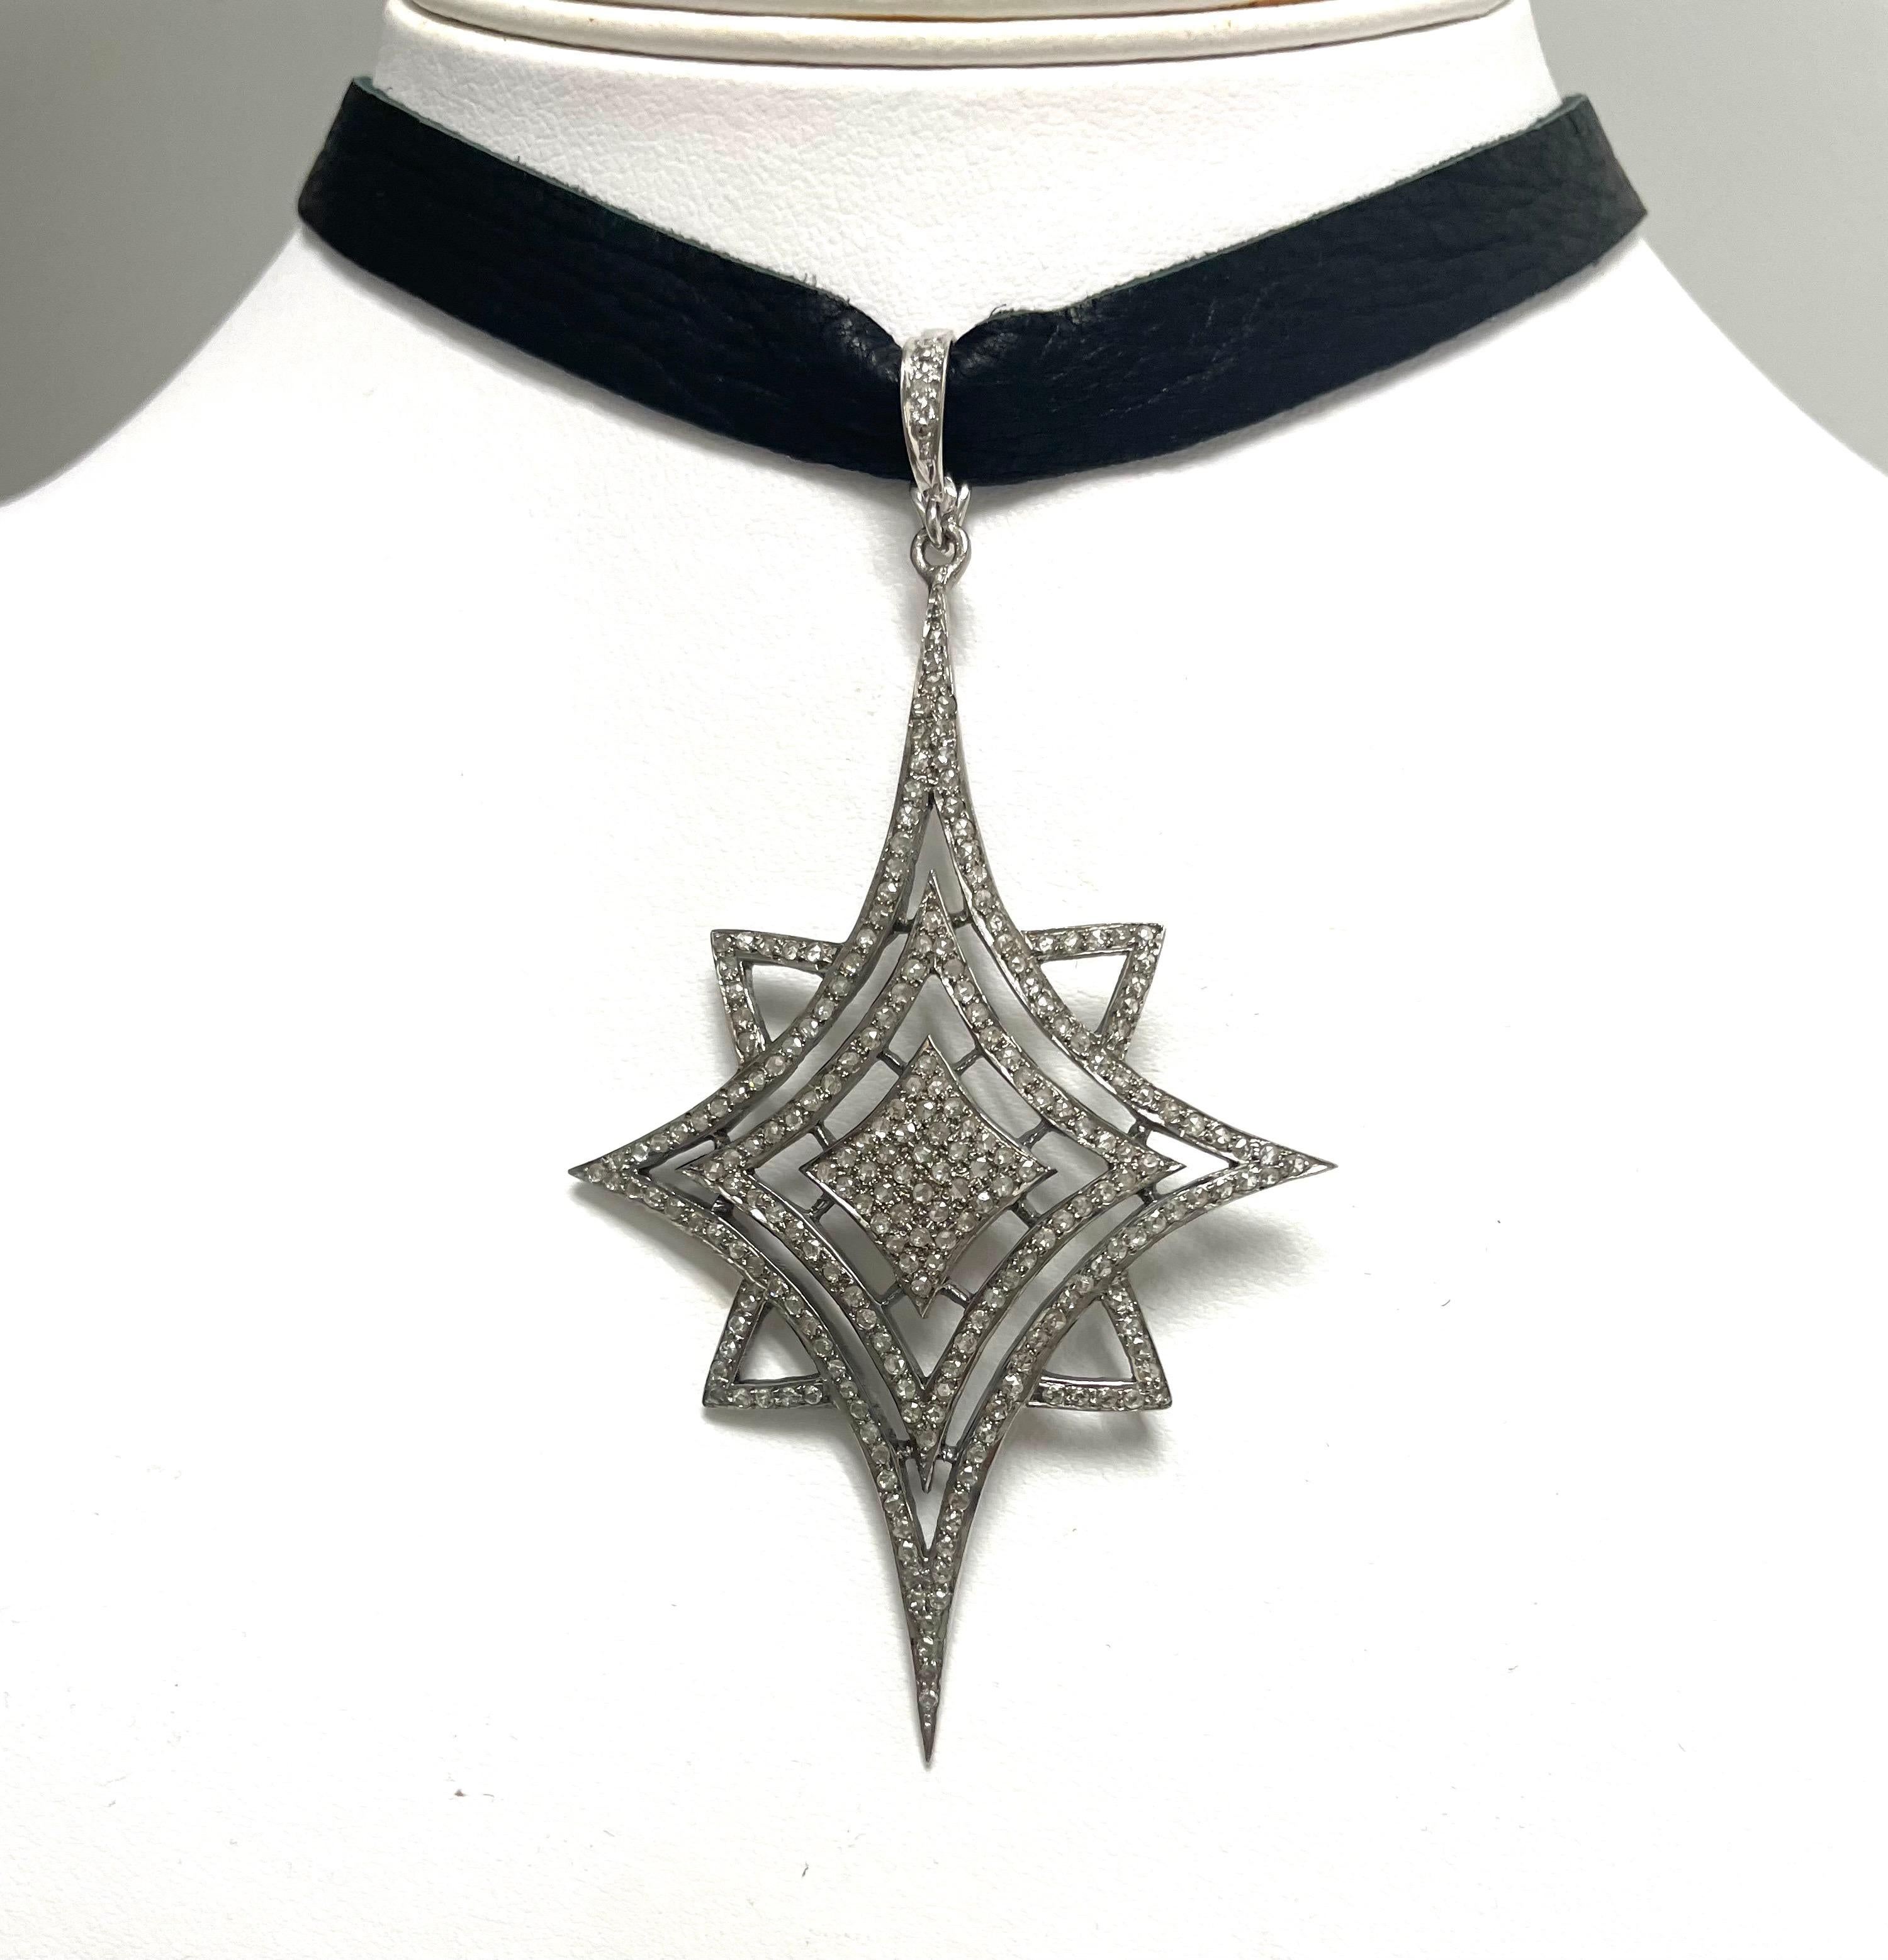 Description
Stunning pave diamond starburst pendant suspended from a beautiful black soft deerskin choker, reversible to suede, length (13.25”) extends with a chain to 14.75”. Item # N3800

Materials and Weight
Pave diamonds 3cts.
Faceted balls 3mm